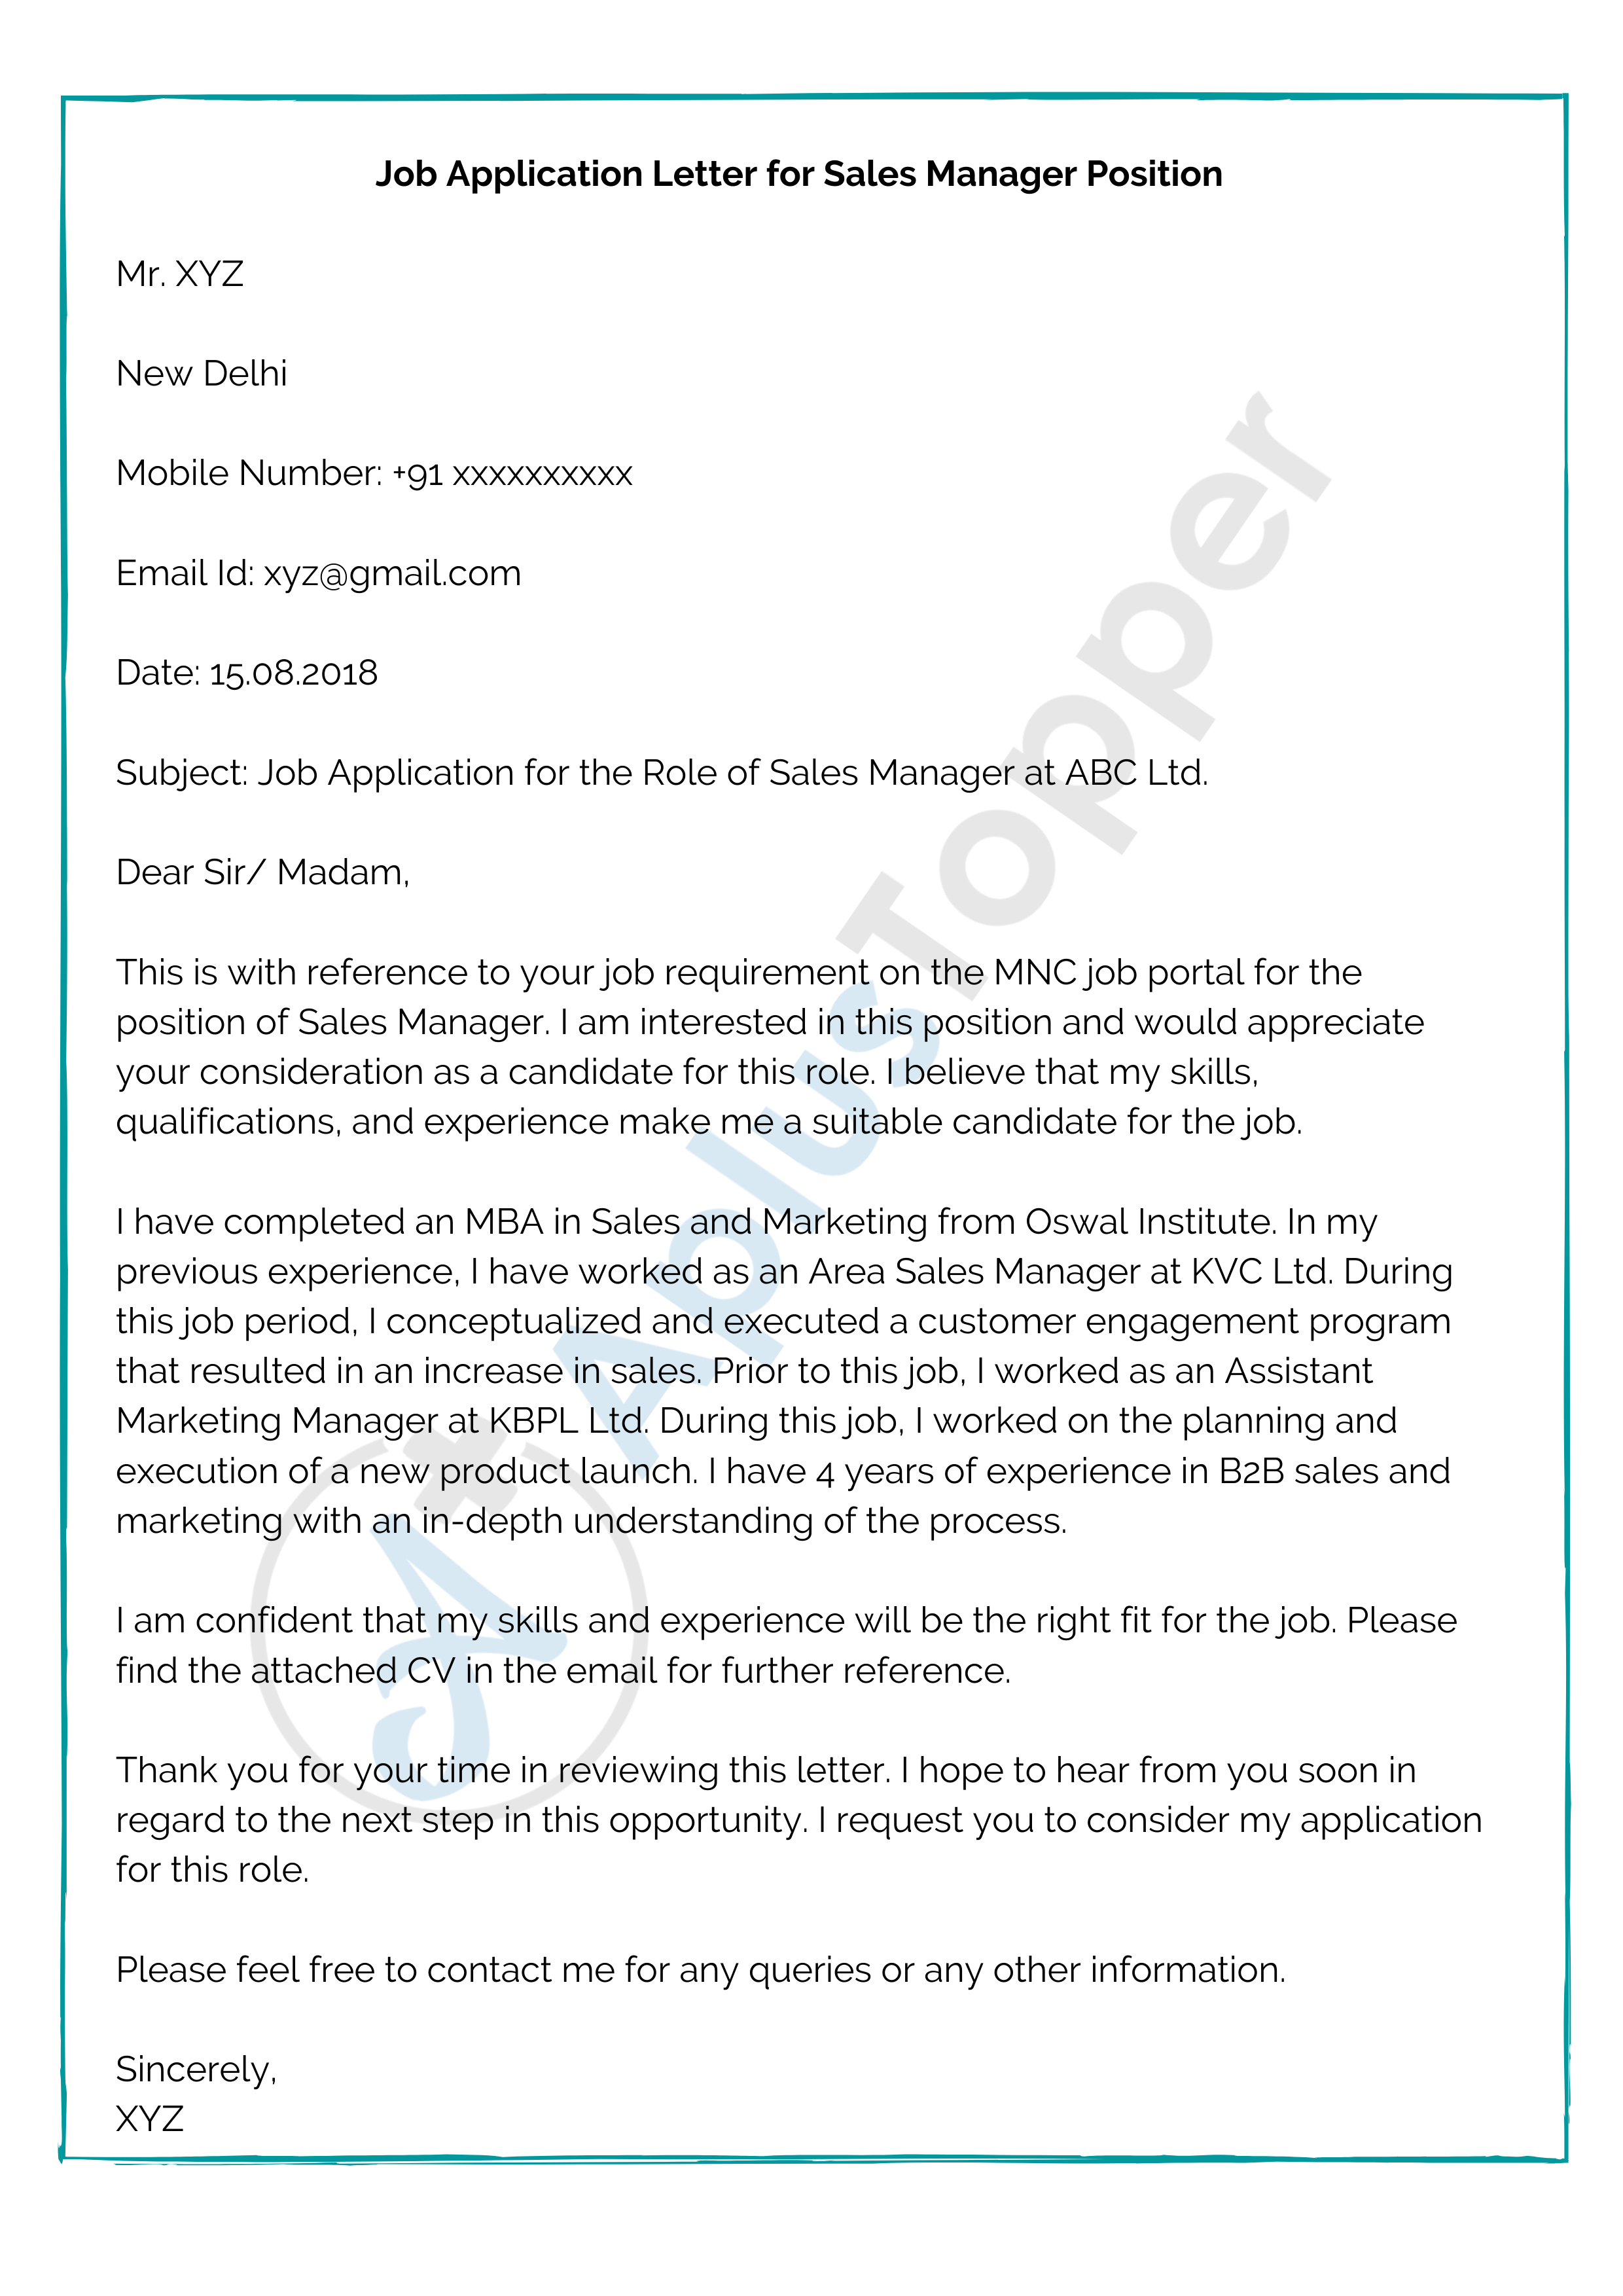 Job Application Letter Format Samples How To Write A Job Application Letter A Plus Topper